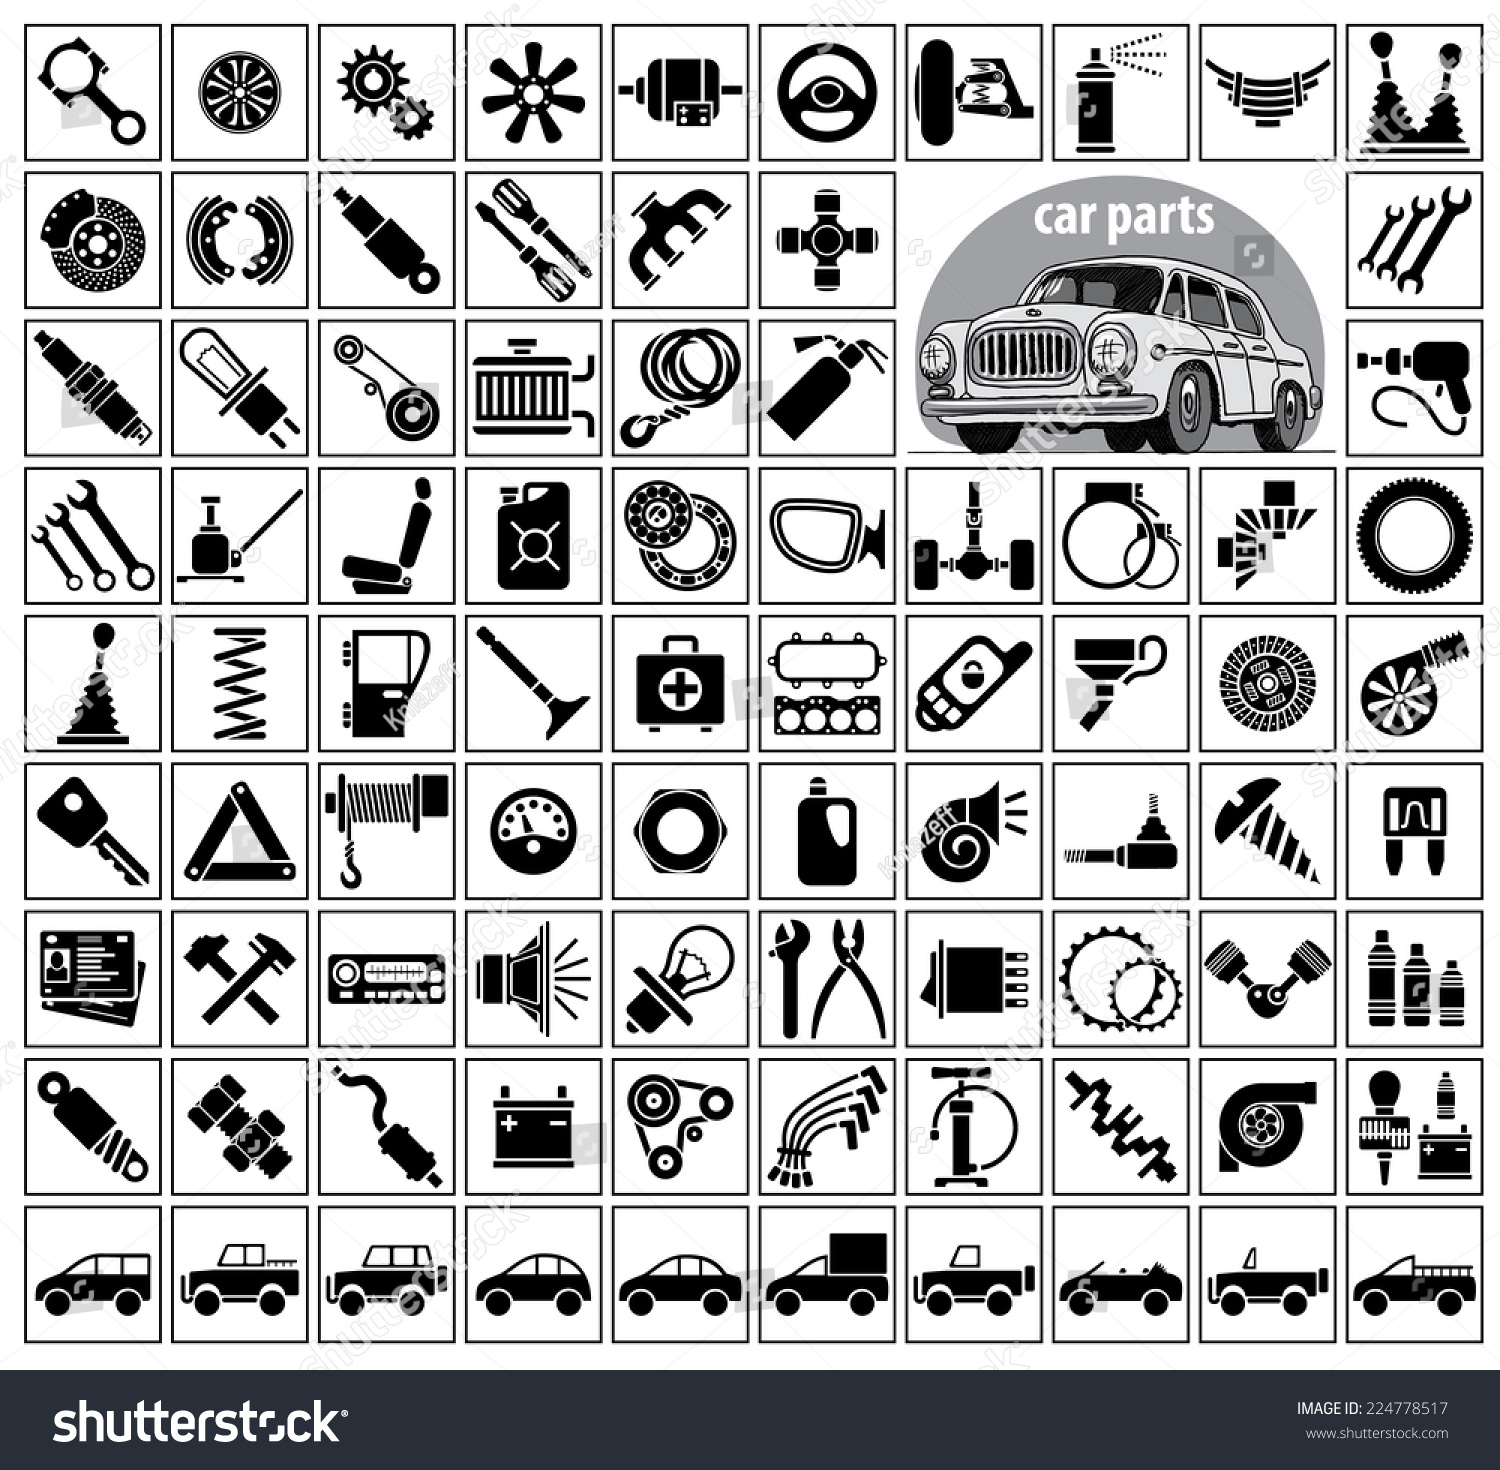 SVG of Car parts, tools and accessories. Eighty four icons and one image of a vintage car. Vector illustration on the white background svg